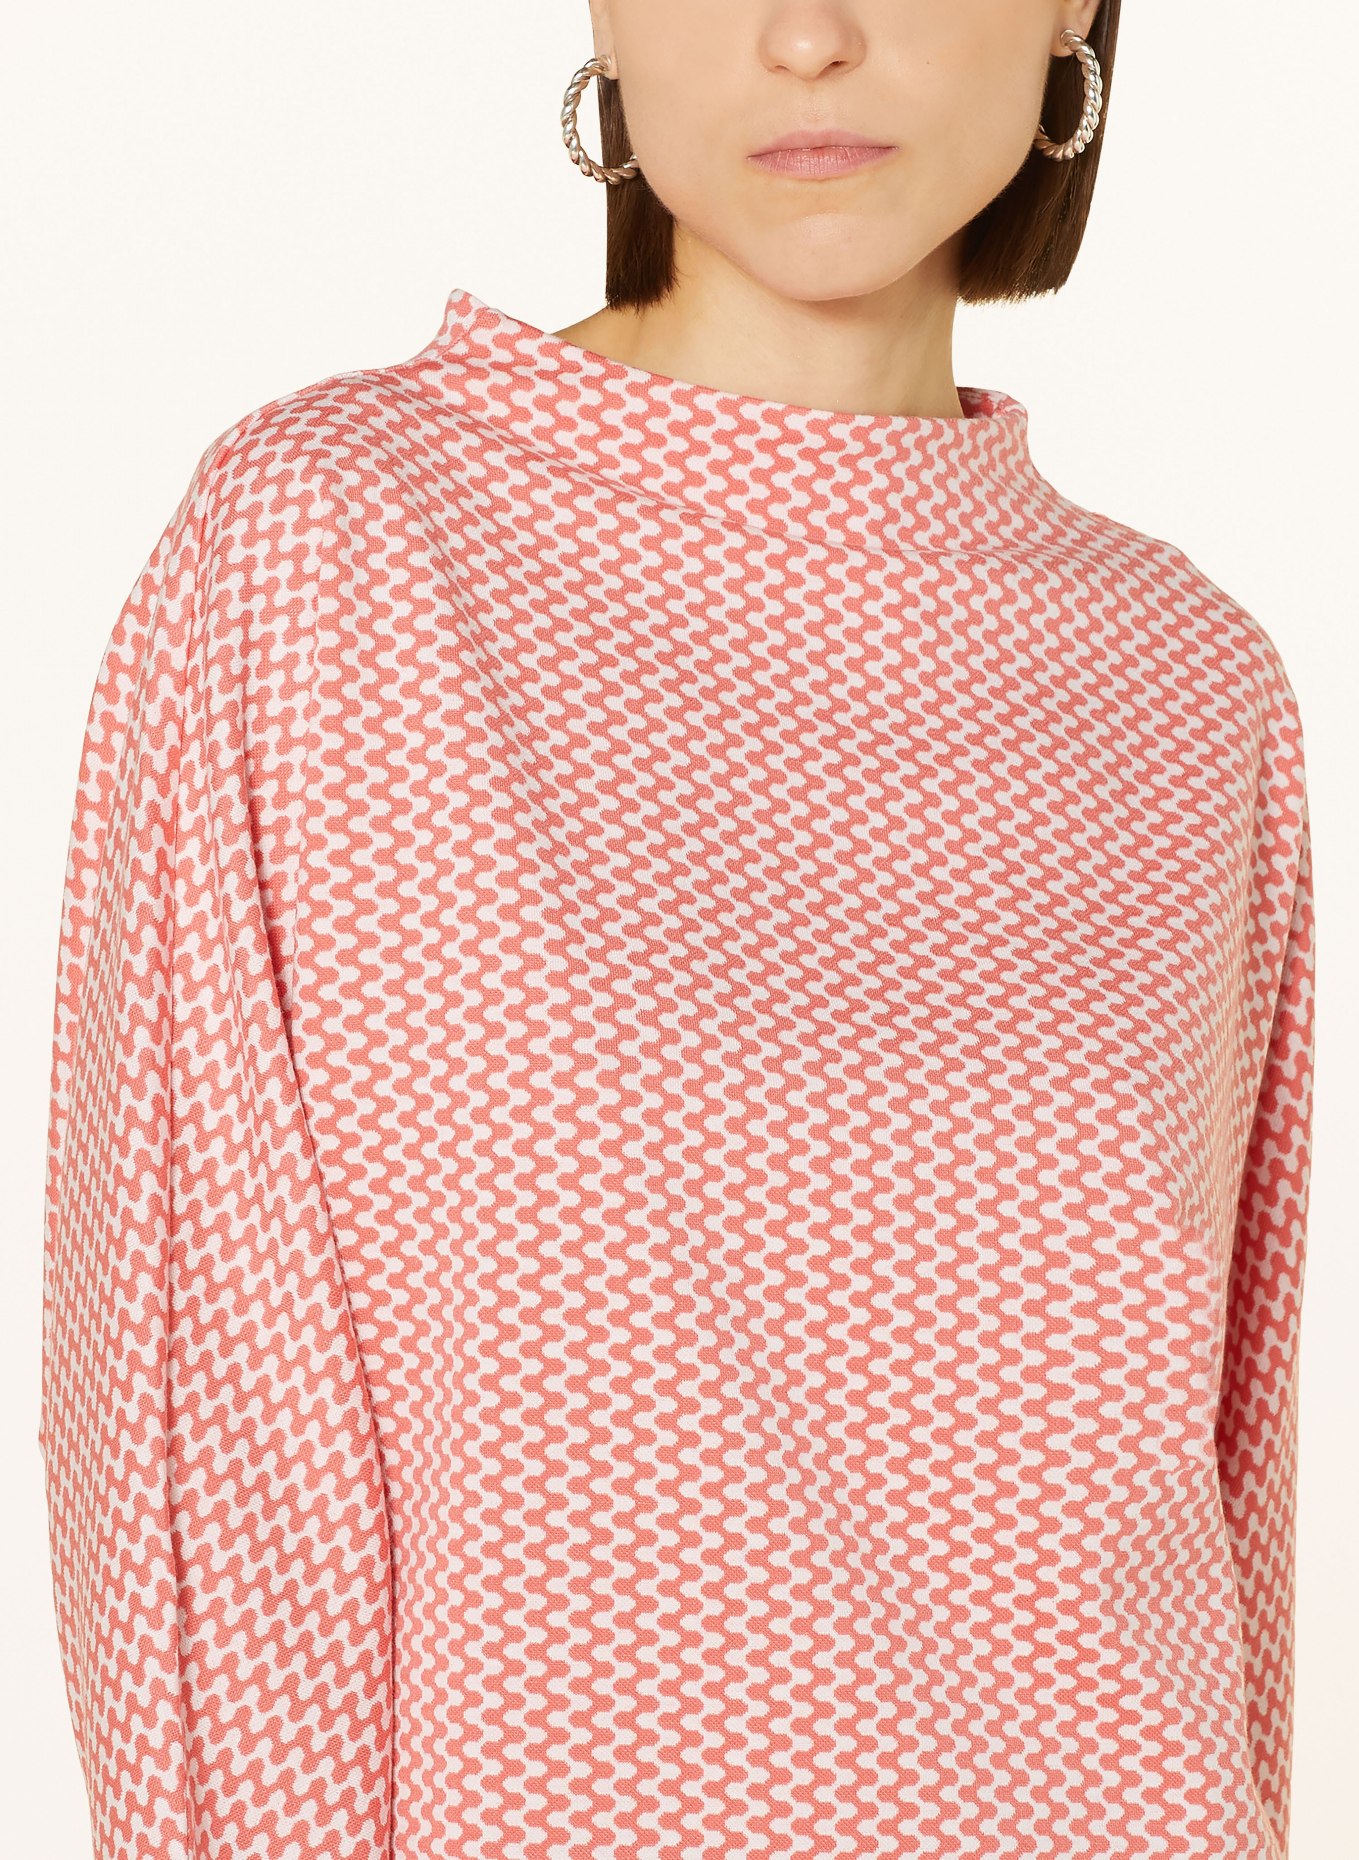 OPUS Sweatshirt GILLU with 3/4 sleeves, Color: LIGHT RED/ WHITE (Image 4)